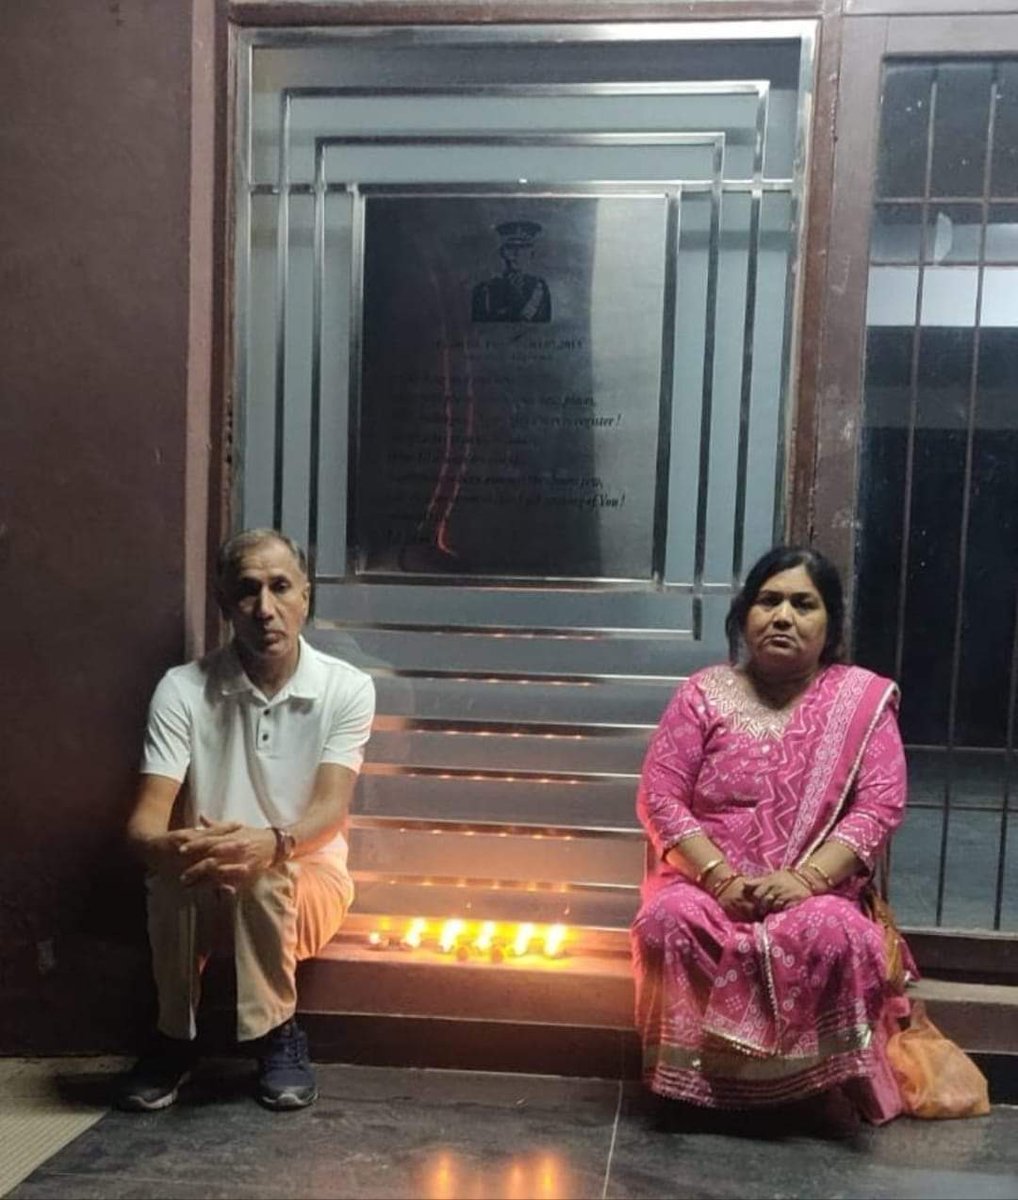 RT @PawanDurani: Parents of Major Anuj Rajput who was killed in a helicopter crash last year at this Diwali. https://t.co/BPeG0mpOEi